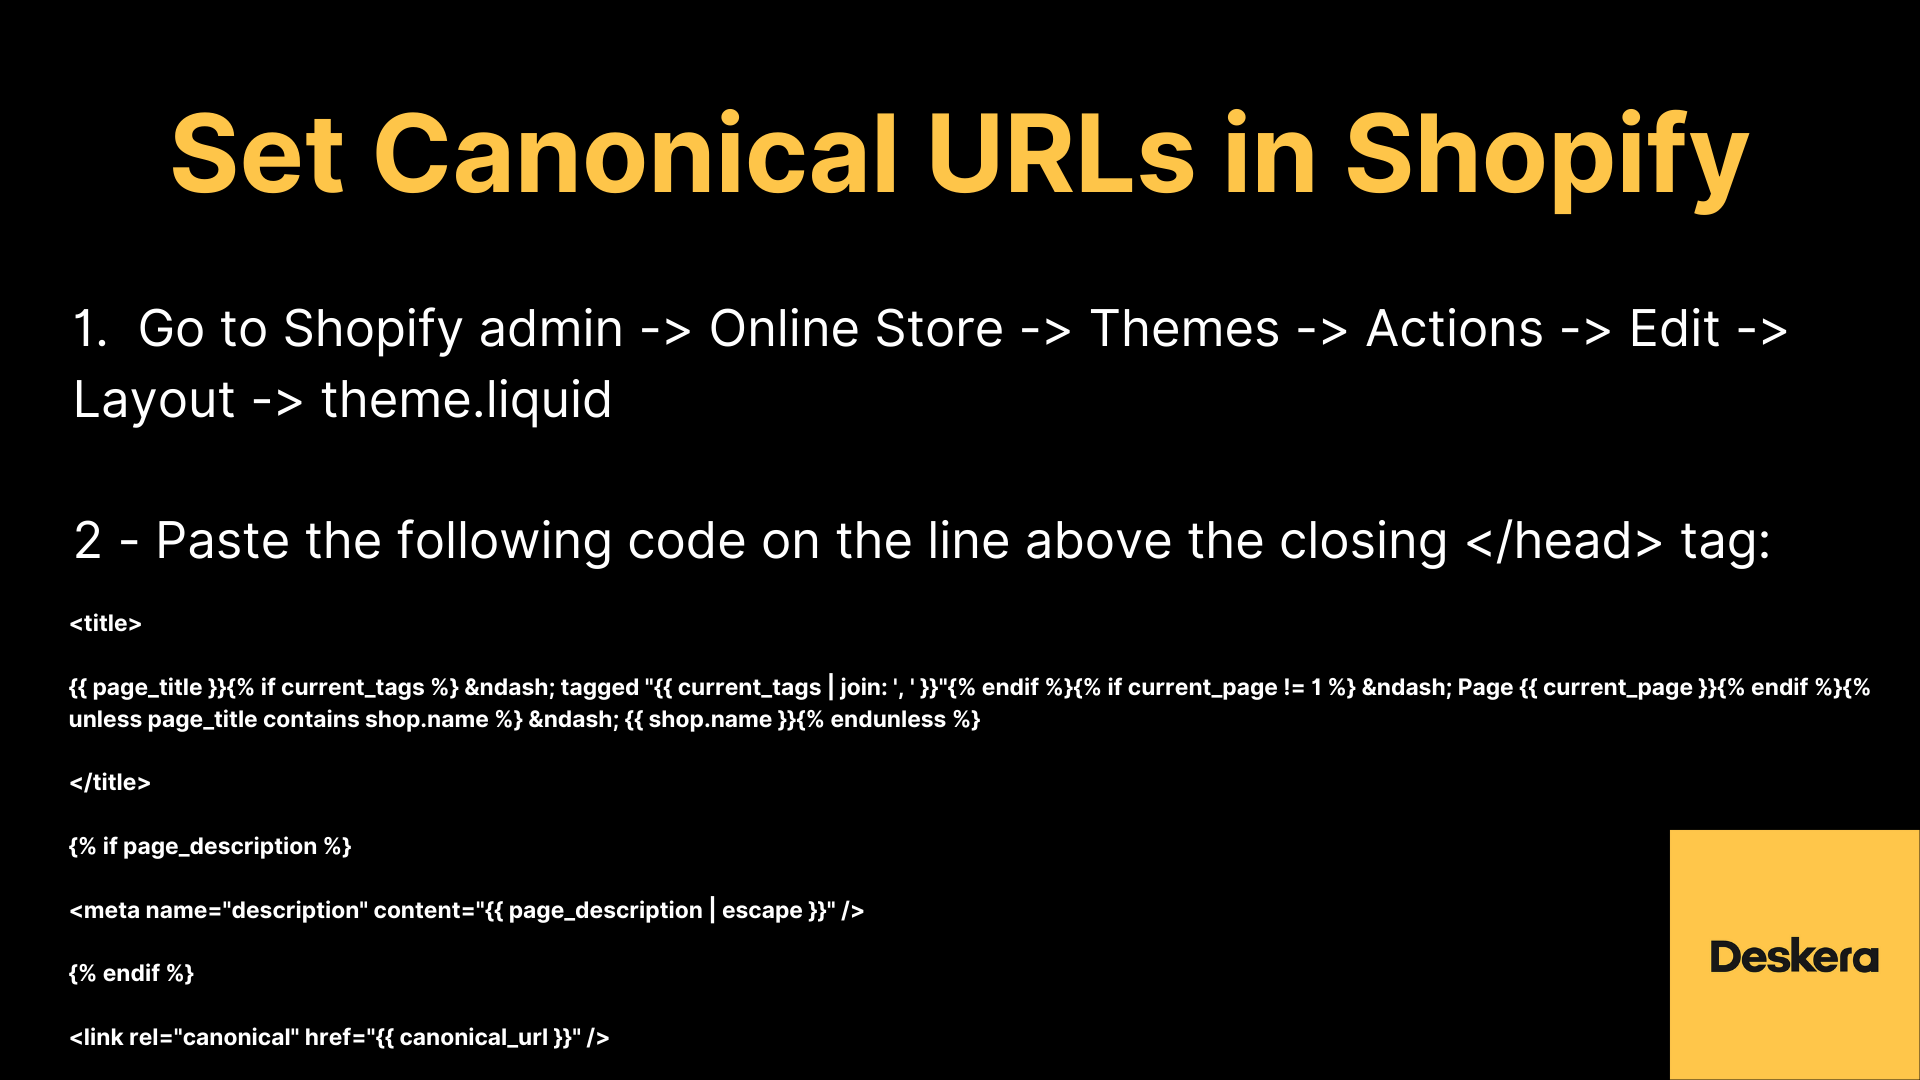 How to Set Canonical URLs in Shopify to Improve Sales of Your eCommerce Business?